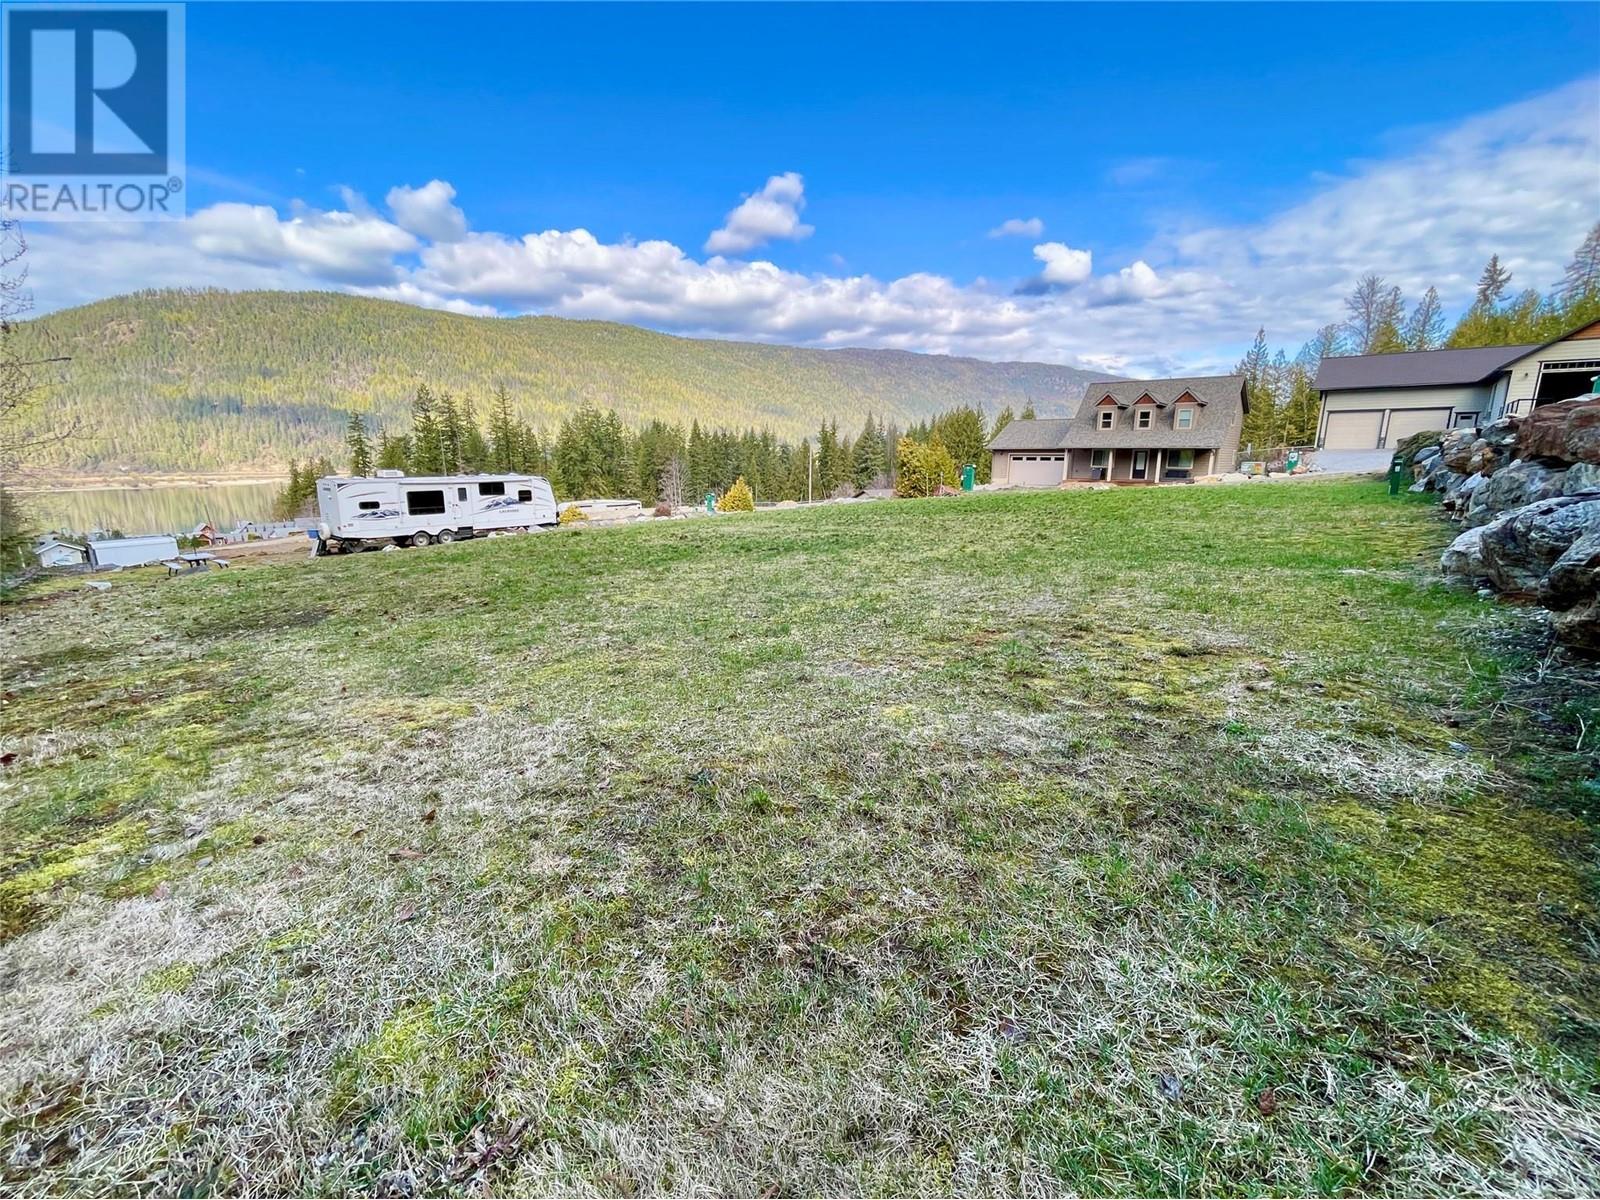 4 8253 Highway 97A Other, Mara